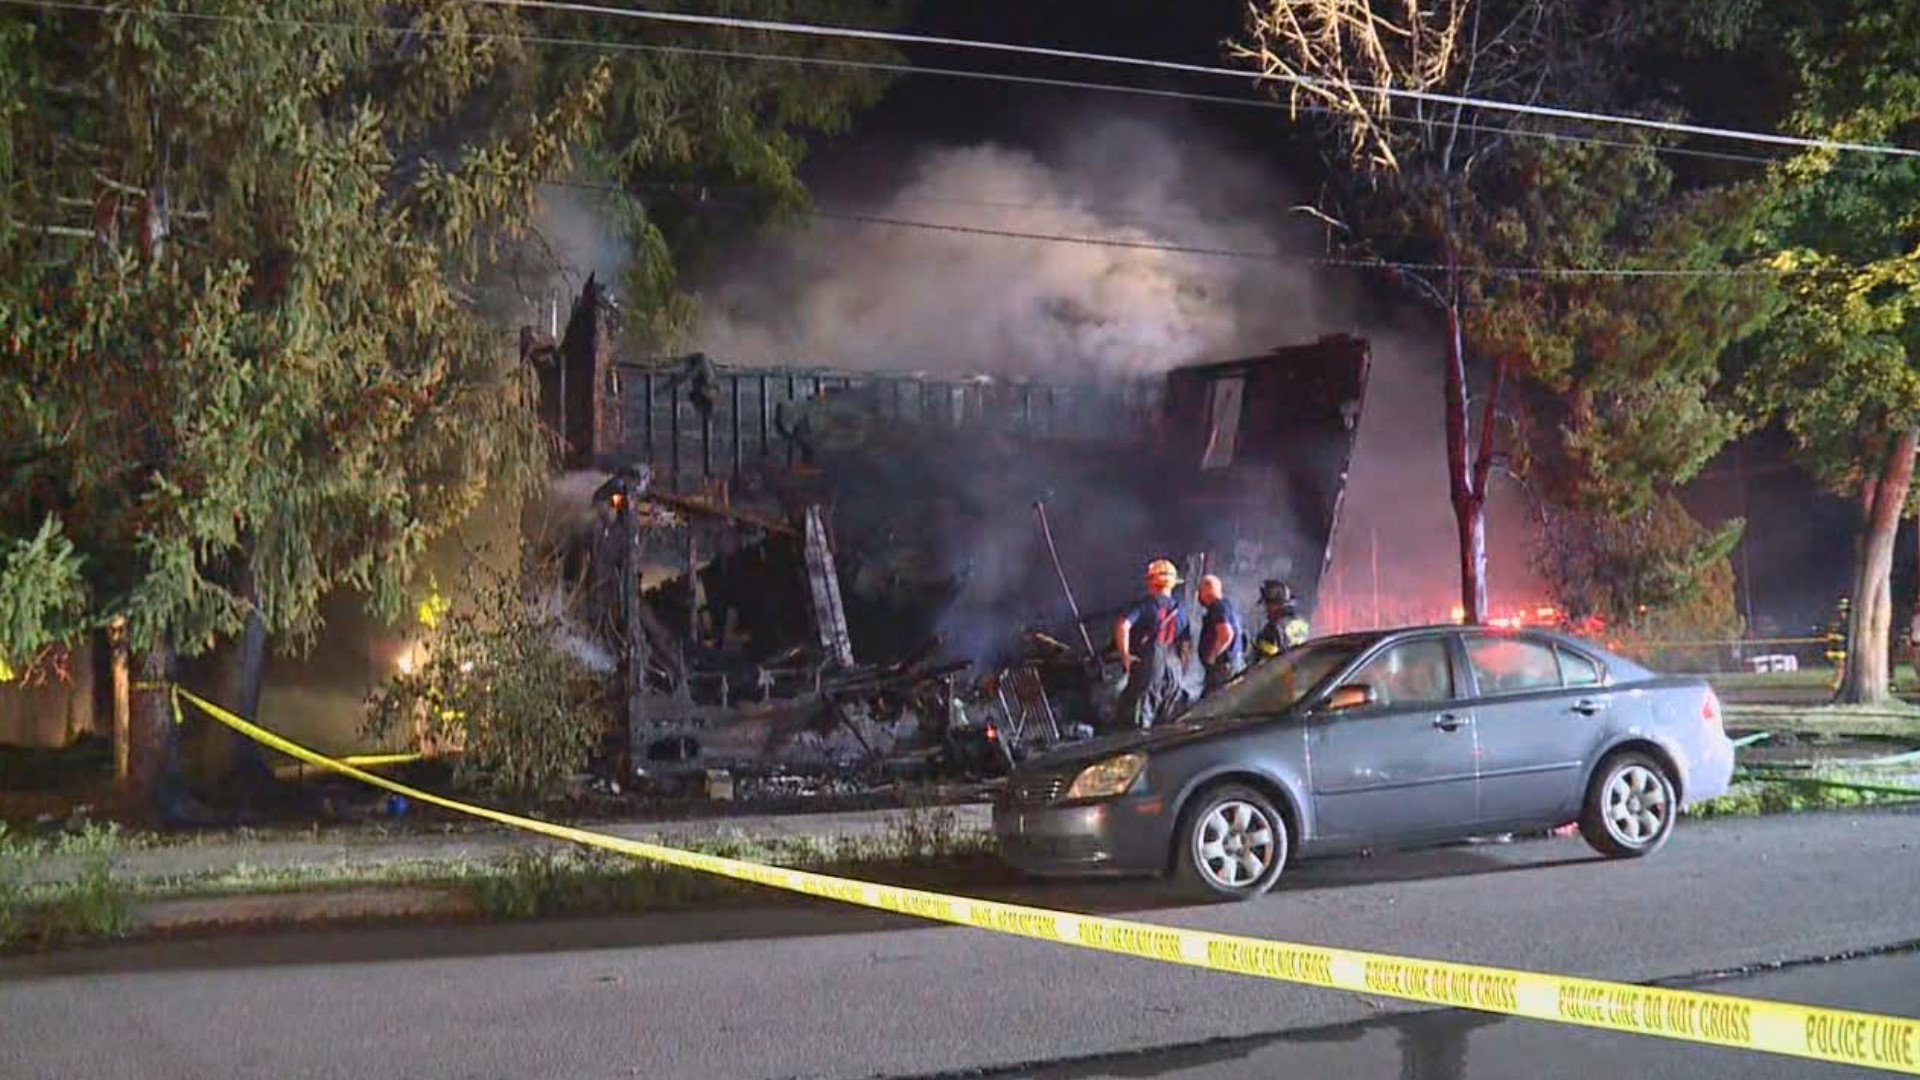 Officials say all ten victims died of smoke inhalation during the early morning fire.